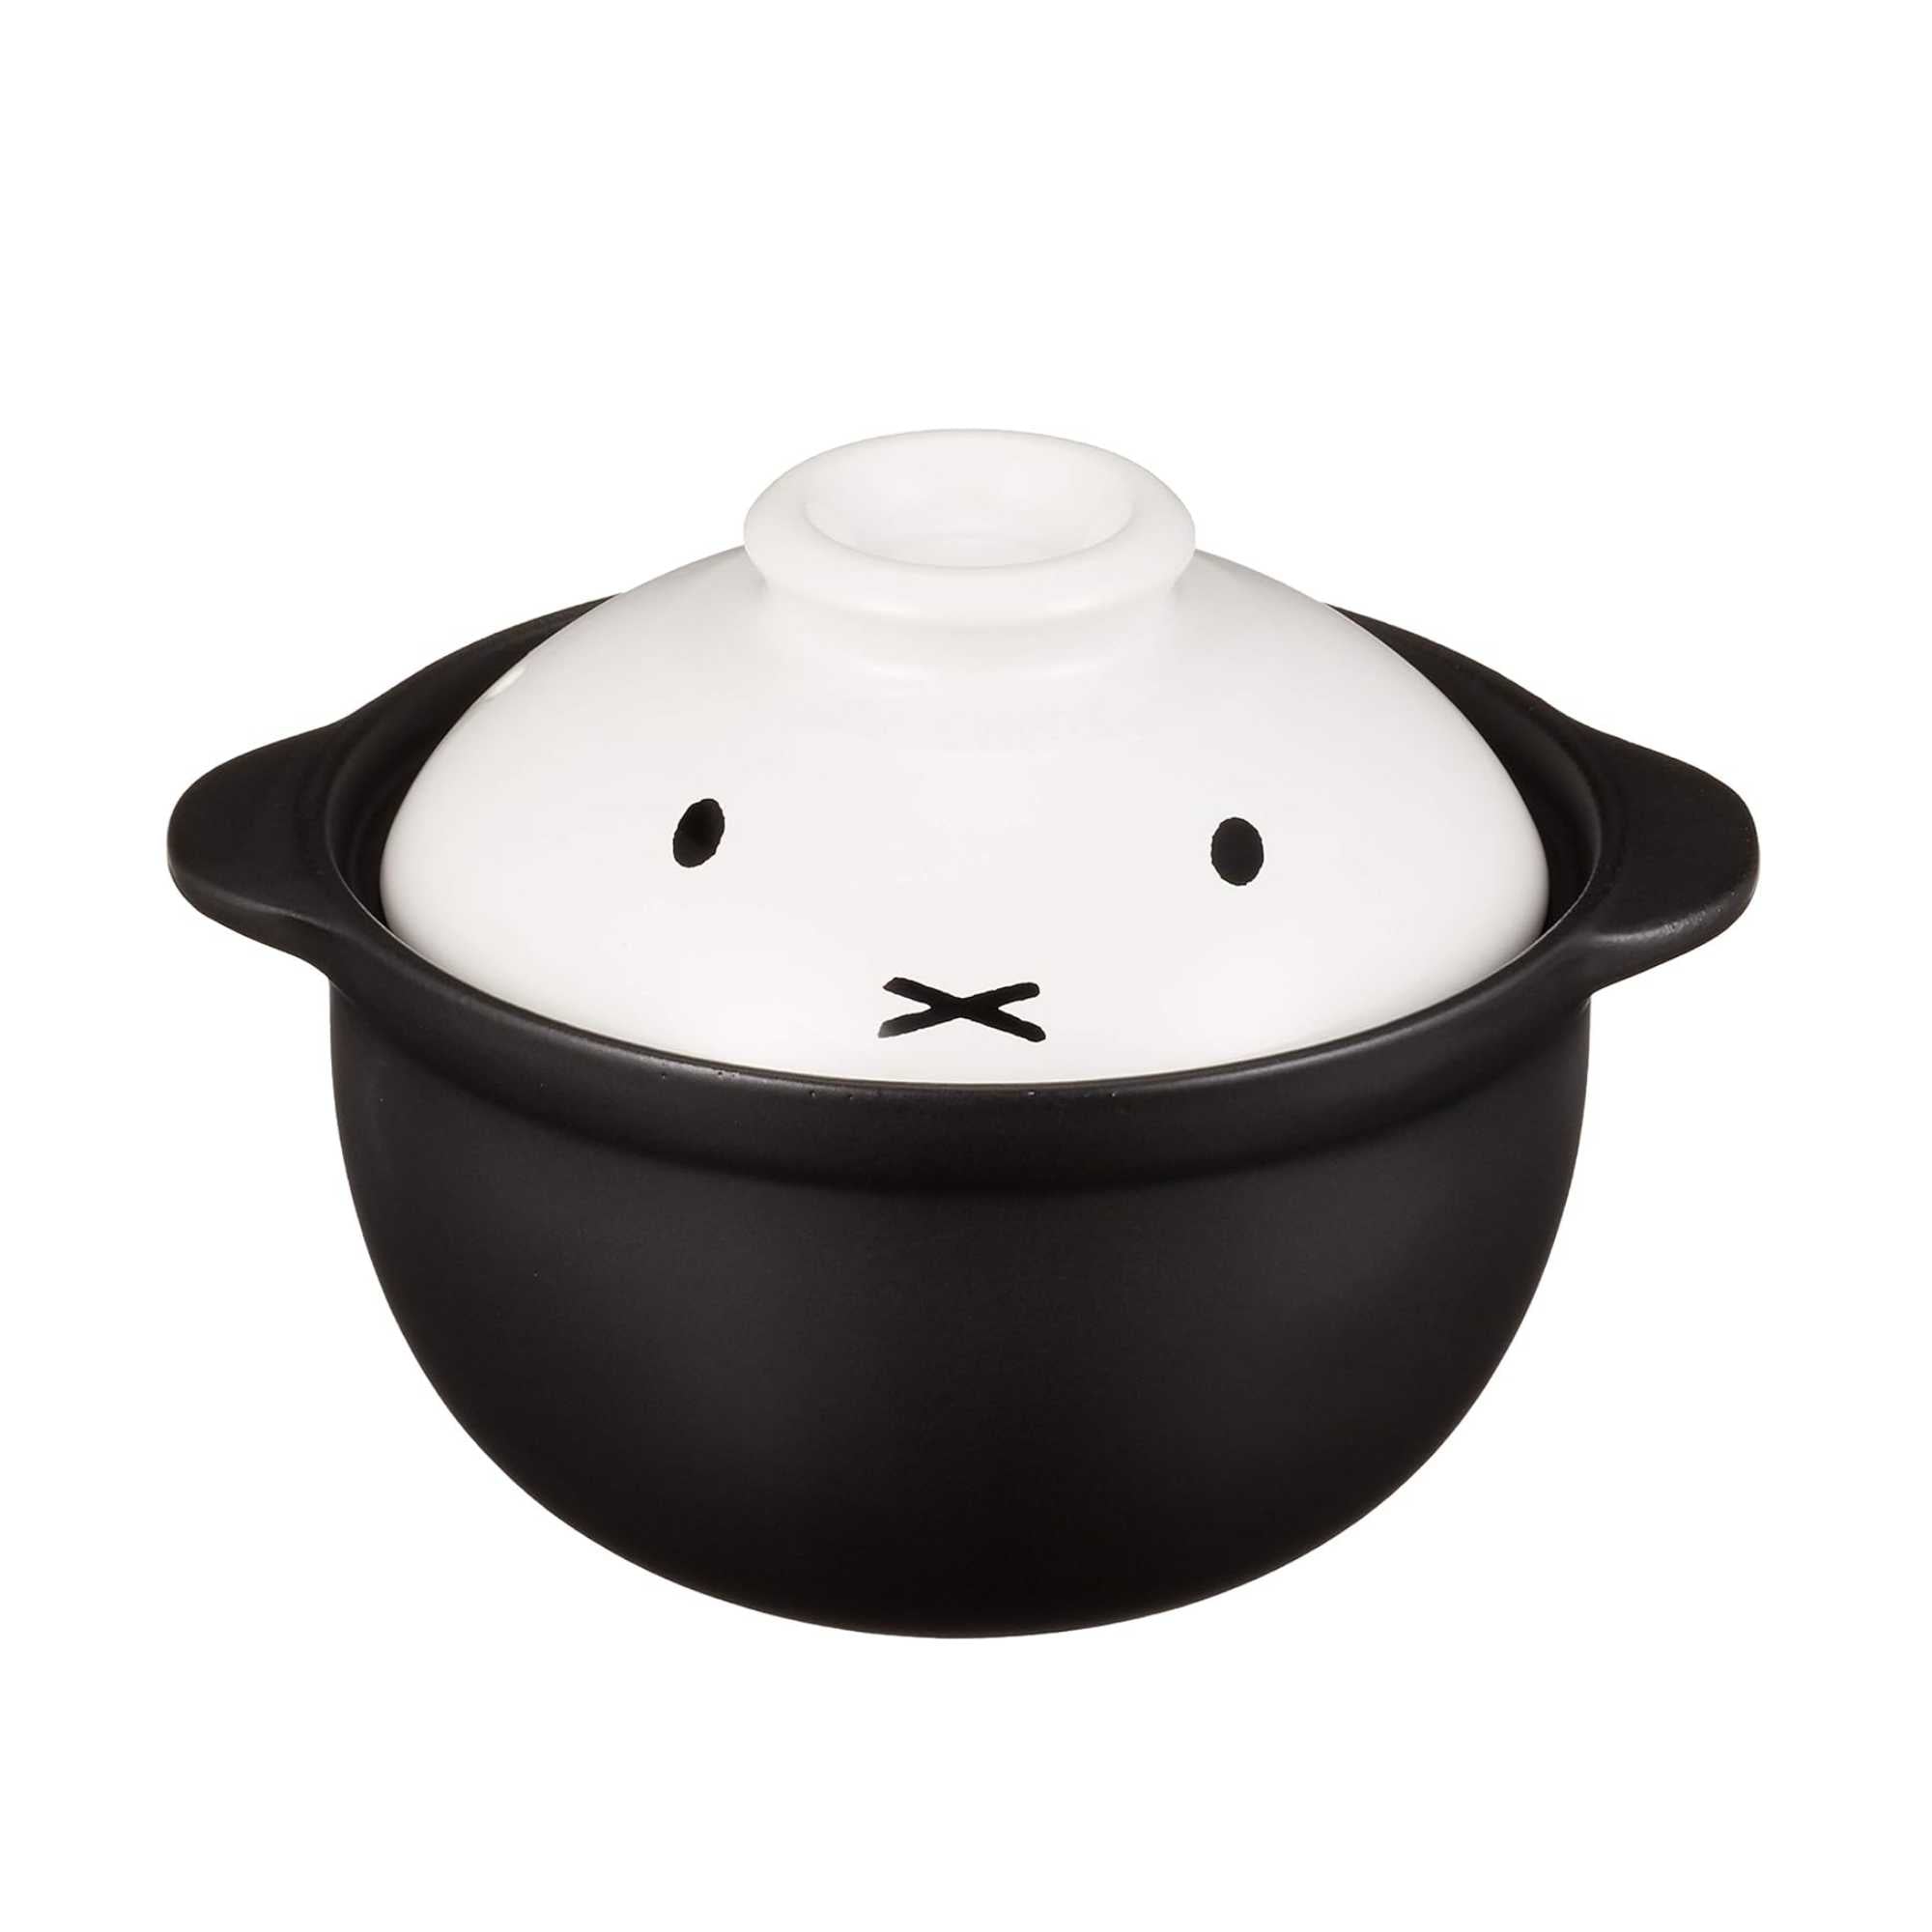 Dick Bruna Miffy Face Earthenware Pot (for one person)